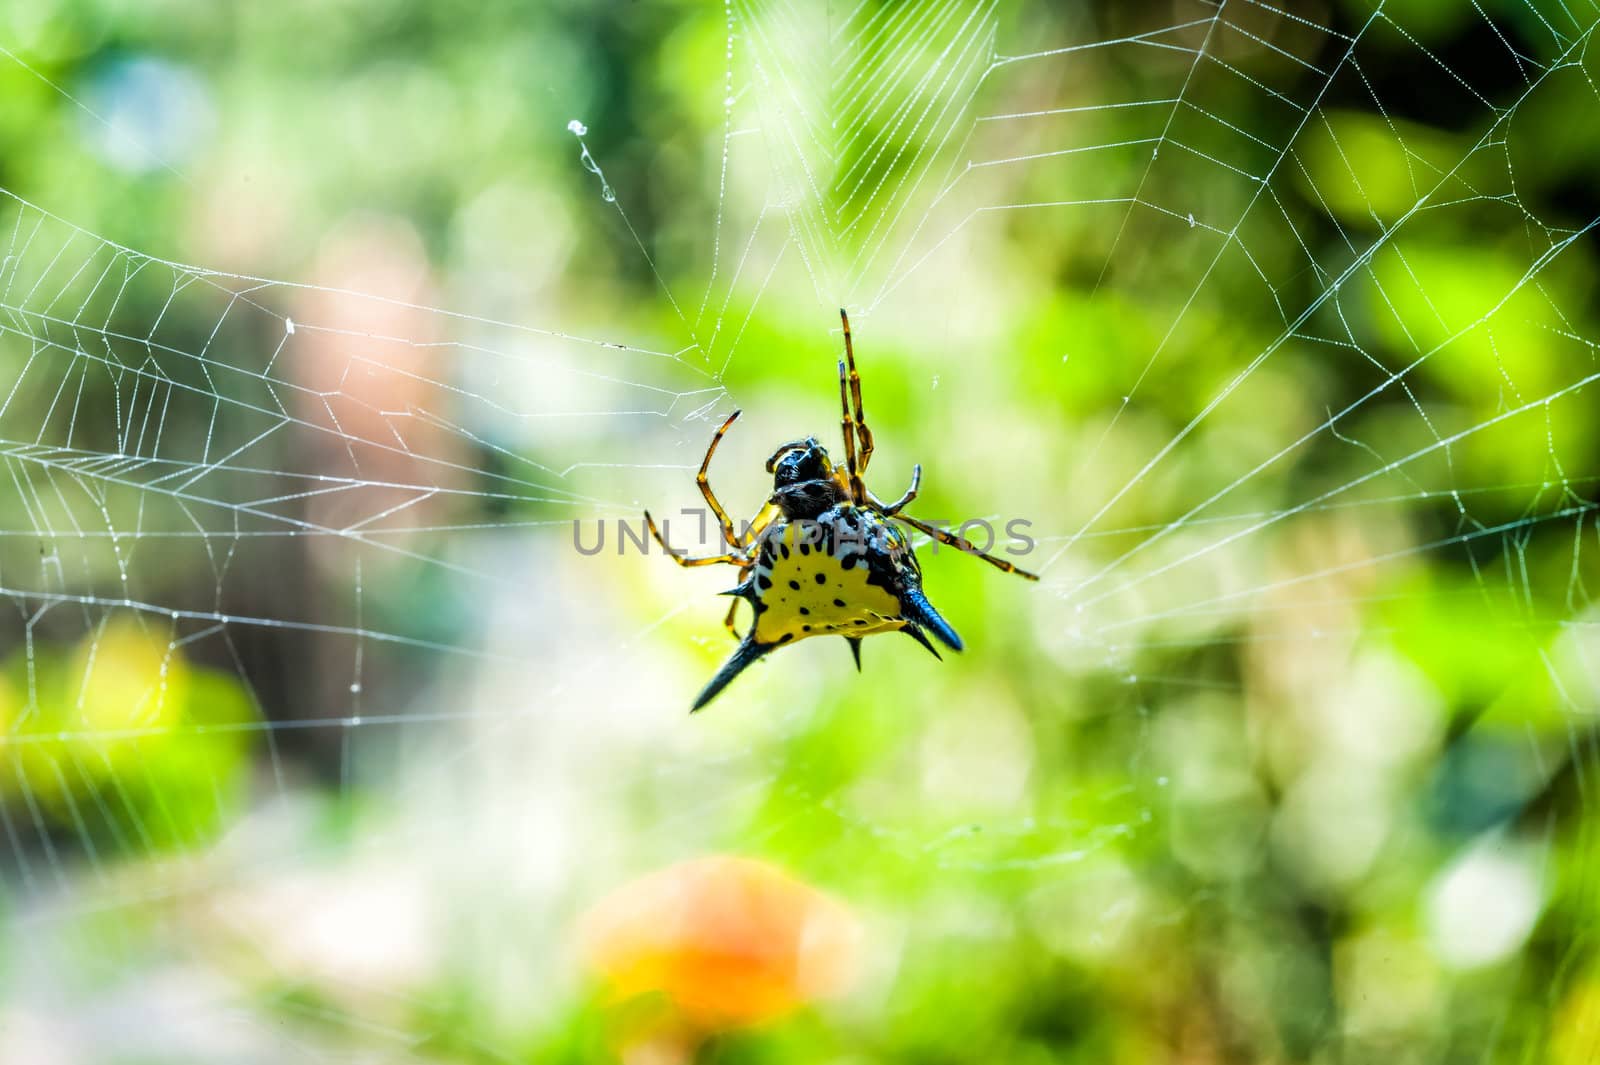 Hasselt's Spiny Spider on cobweb with bokeh background